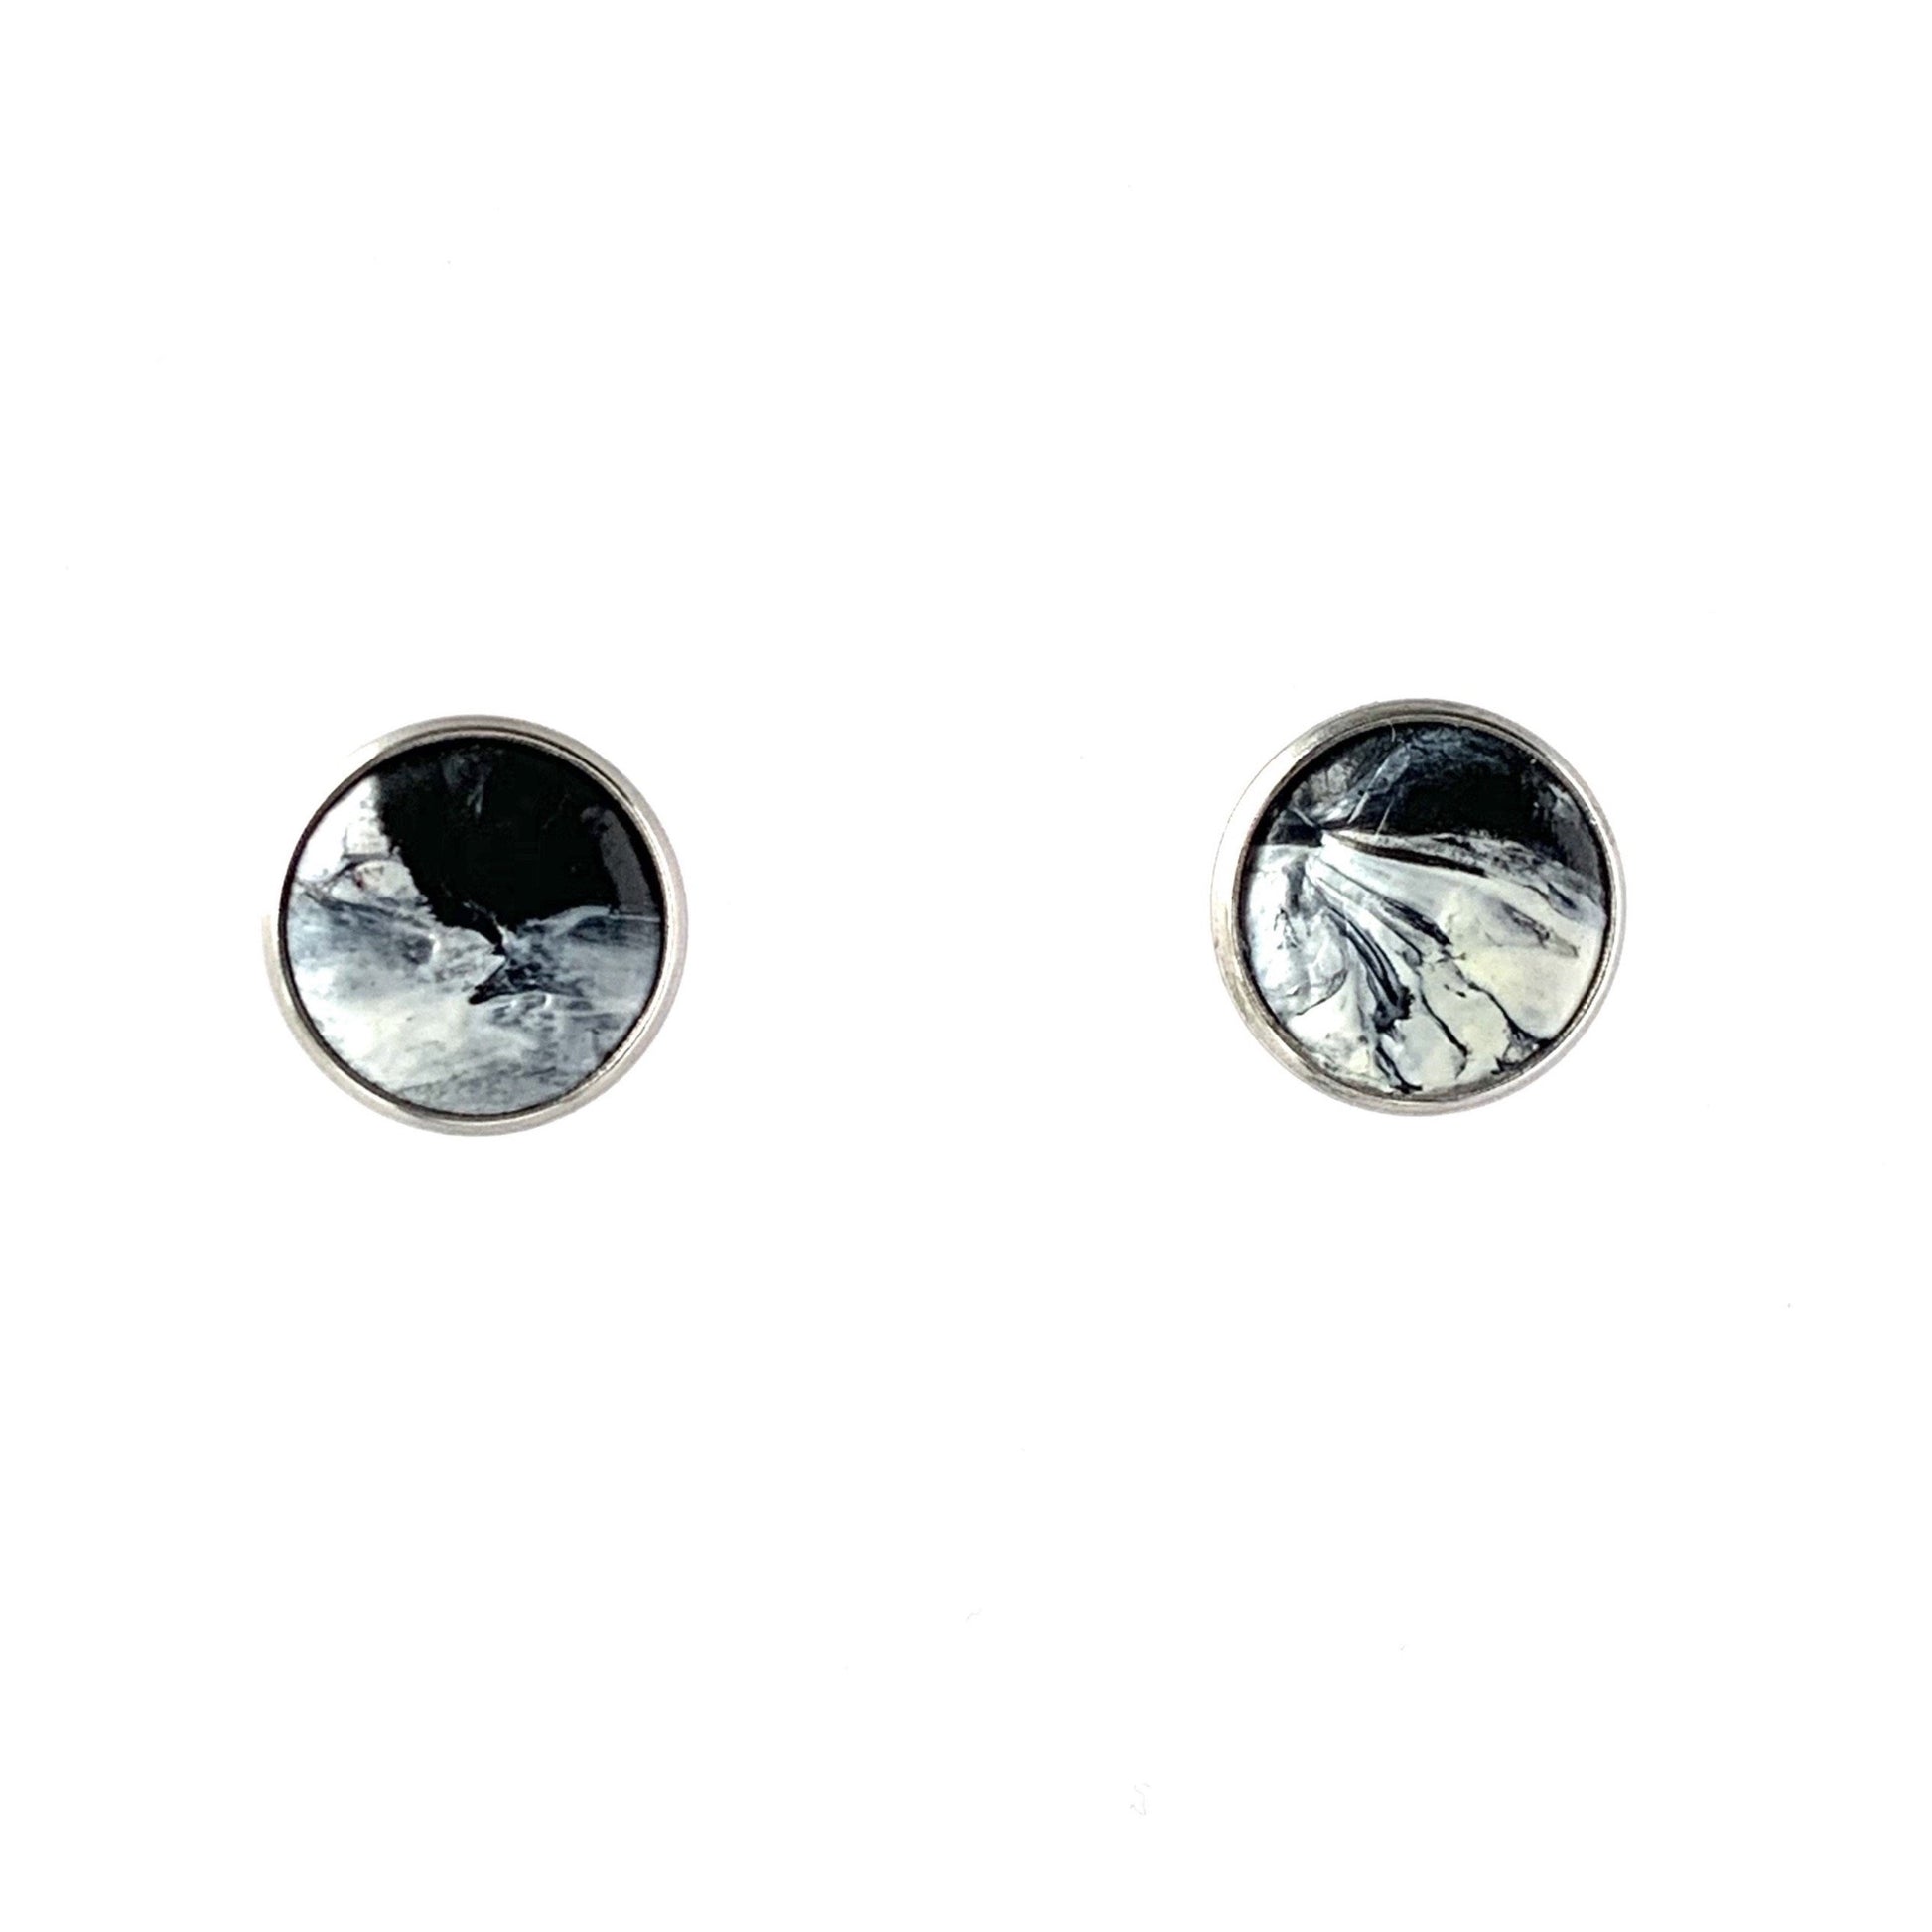 Black & White 12 mm studs handmade from plastic waste Recycled plastic necklace jewellery earrings studs handmade in London by Jagoda Jay Sudak Keshani eco gift for her him